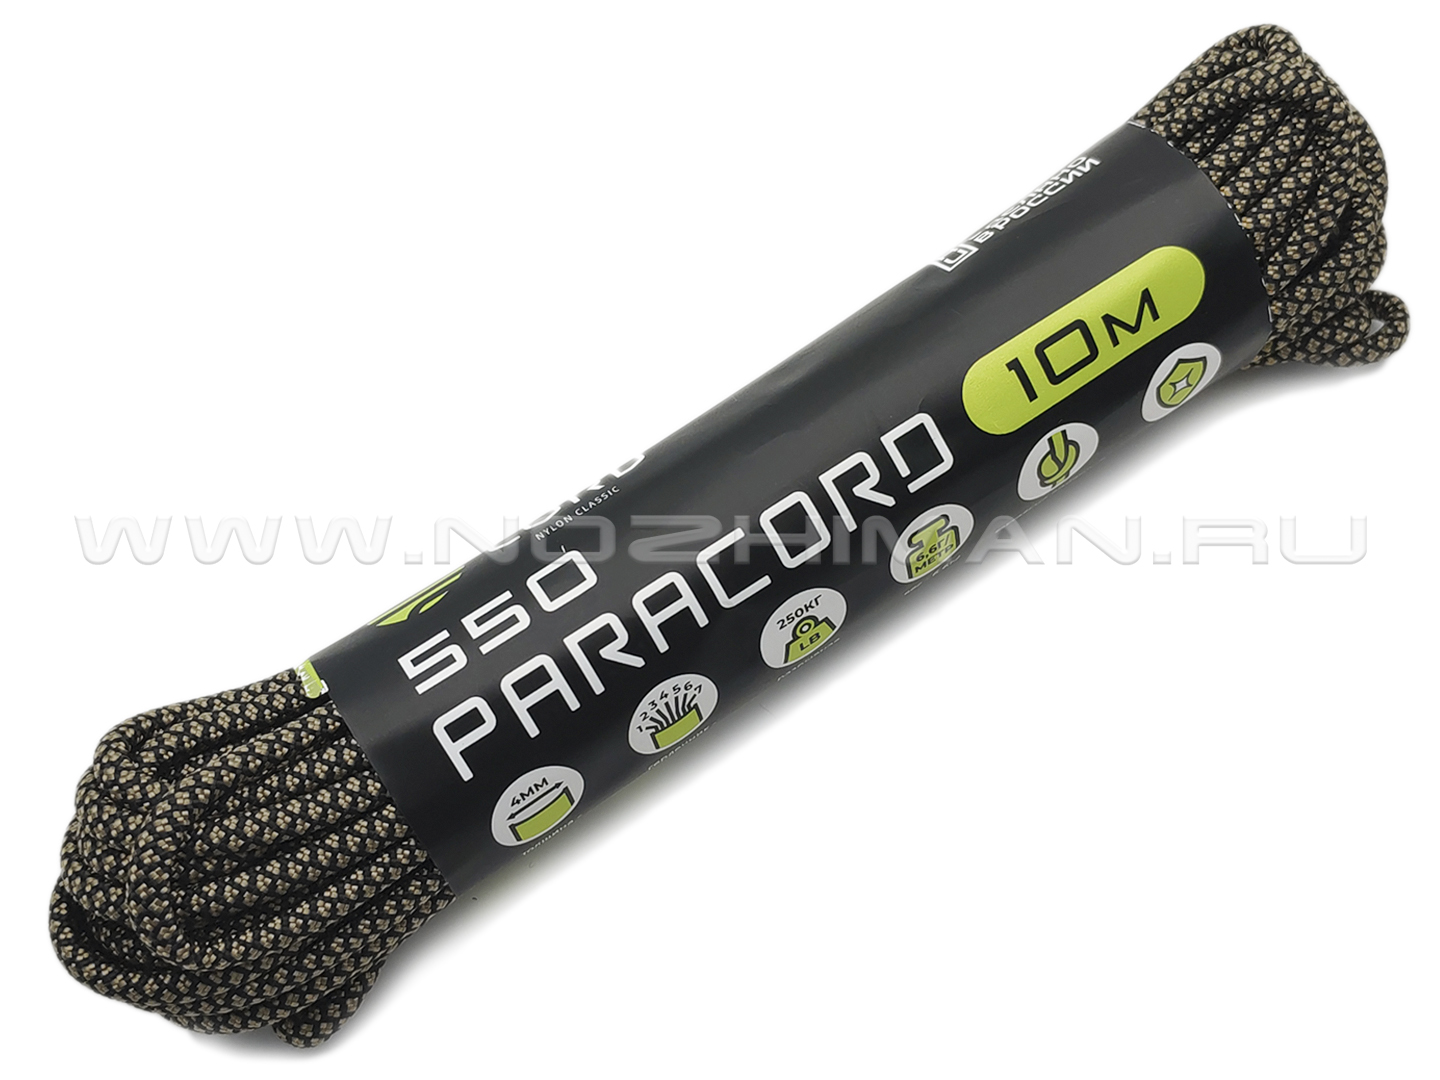 CORD Paracord 550 Sand Snake